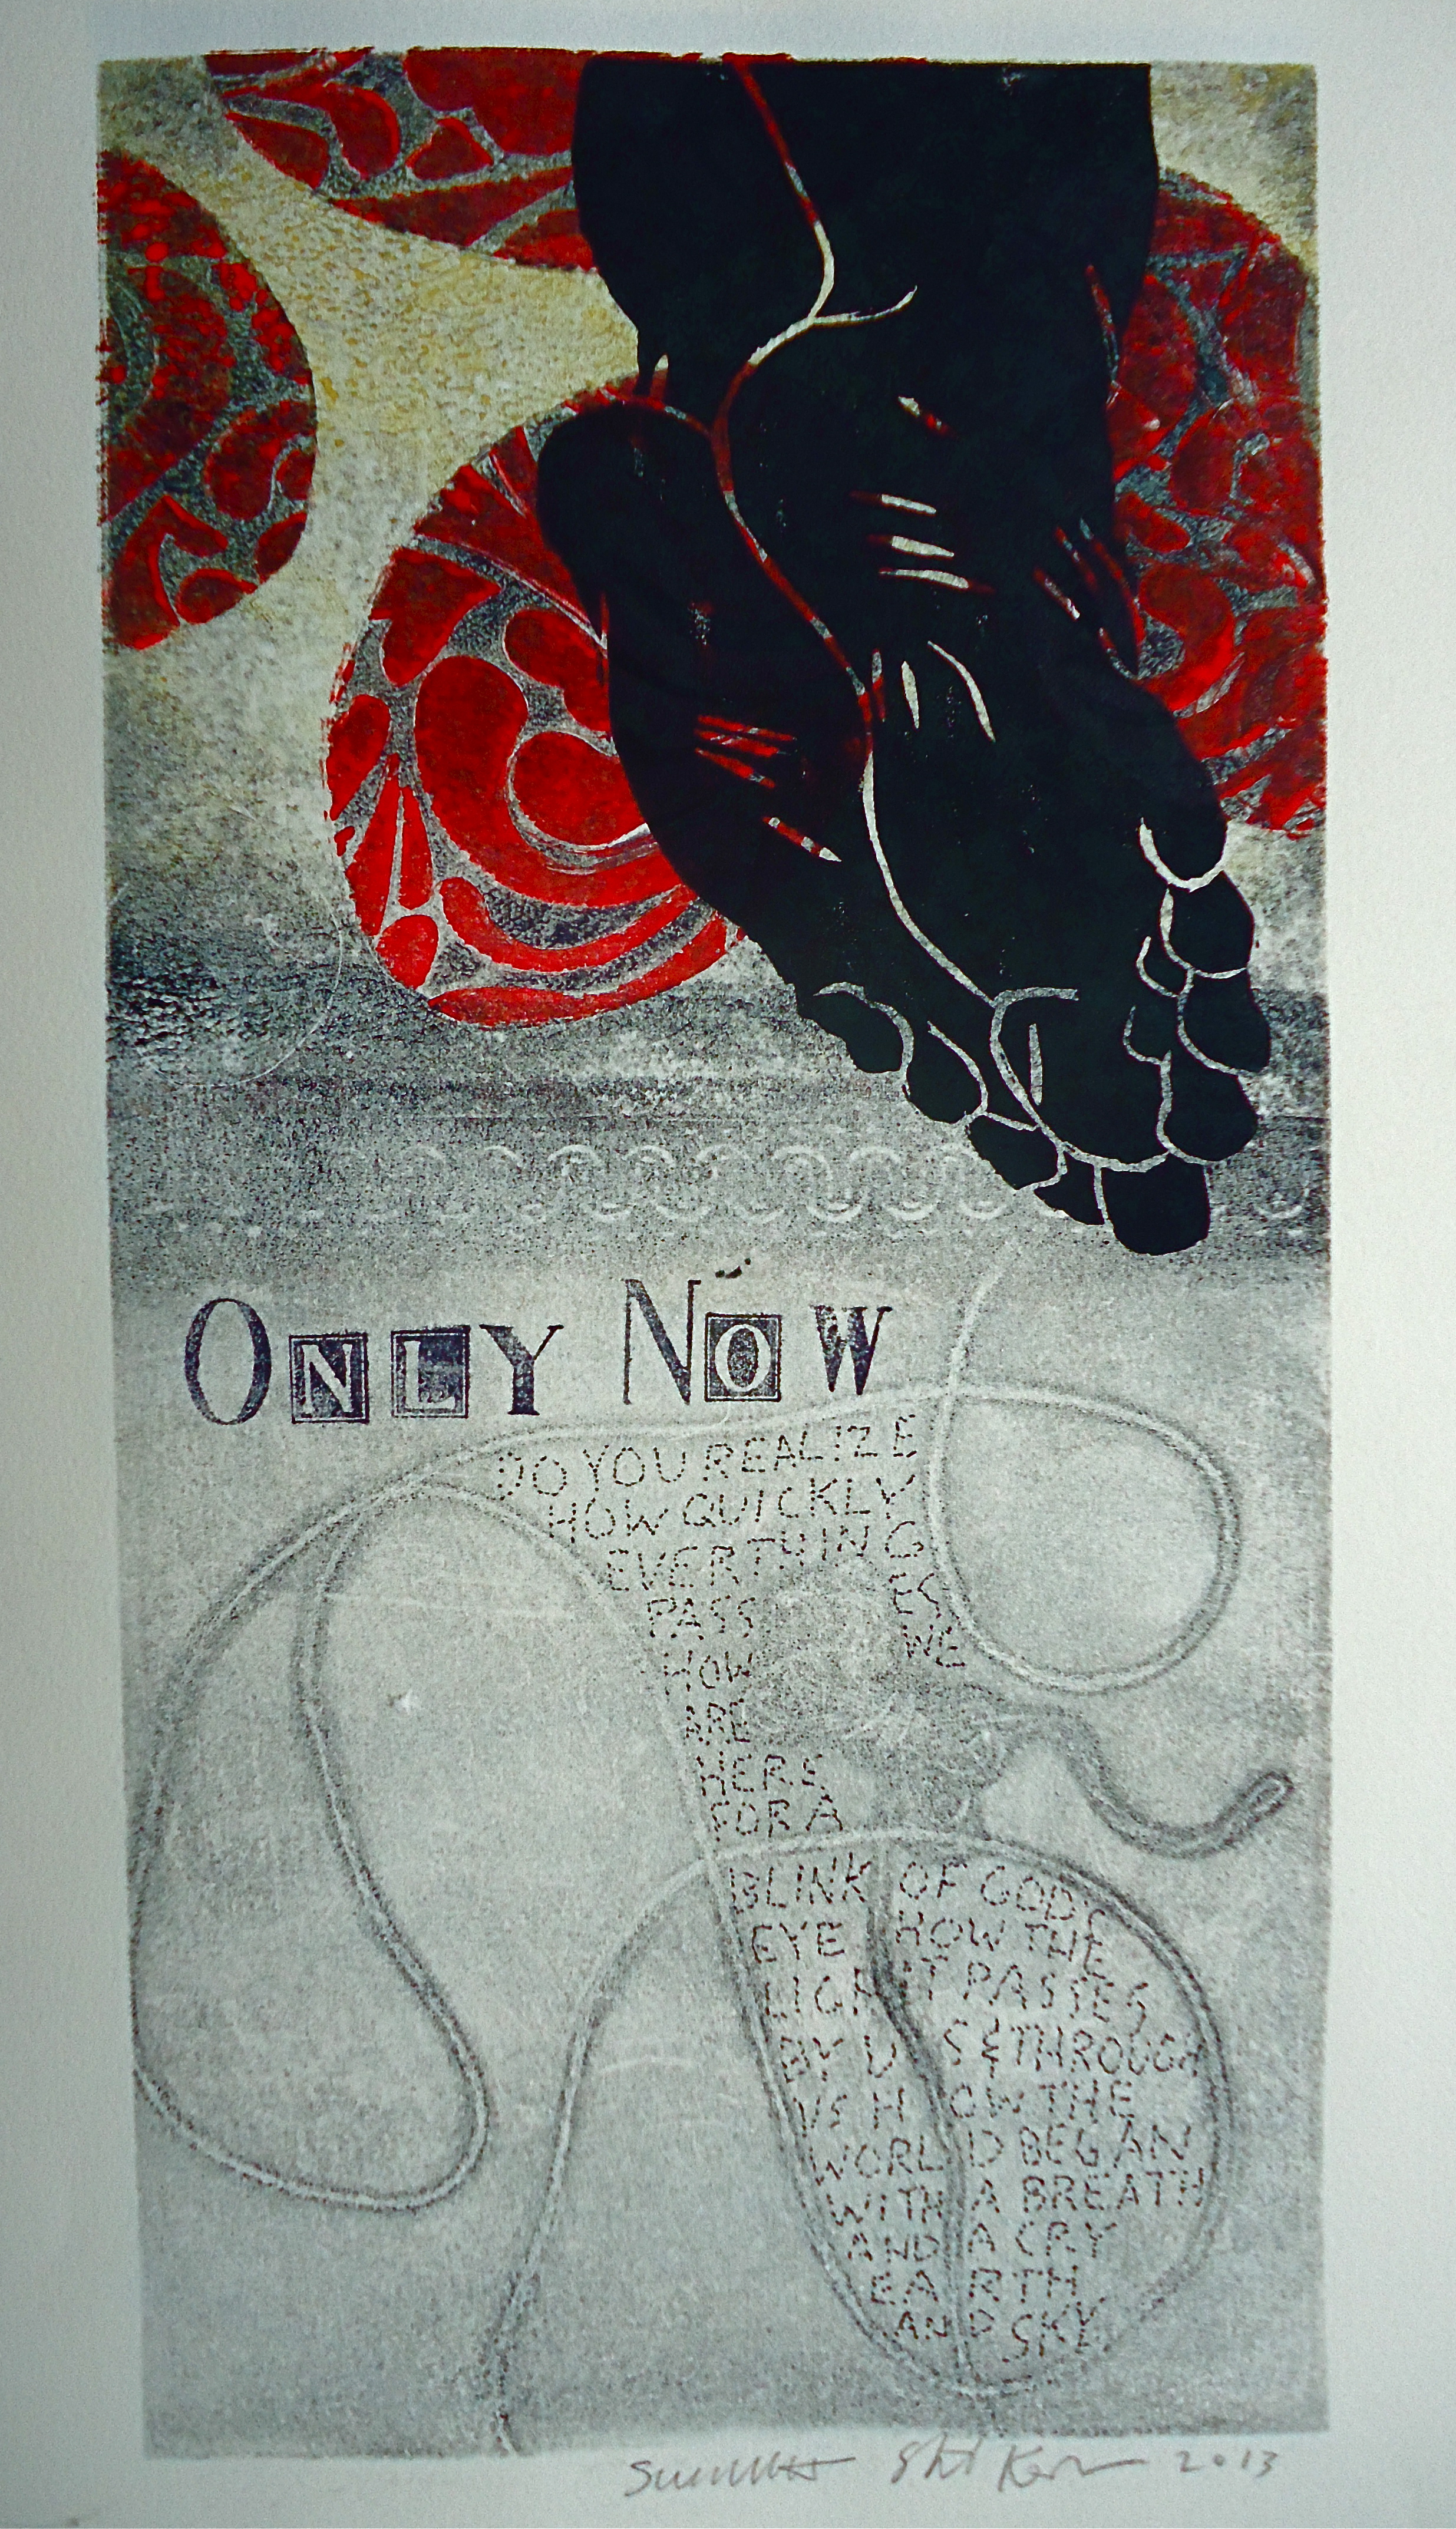   Only Now   6 x 12 inches  mixed media  image: Susan Webster  hand written and stamped&nbsp;text: Stuart Kestenbaum  2013 